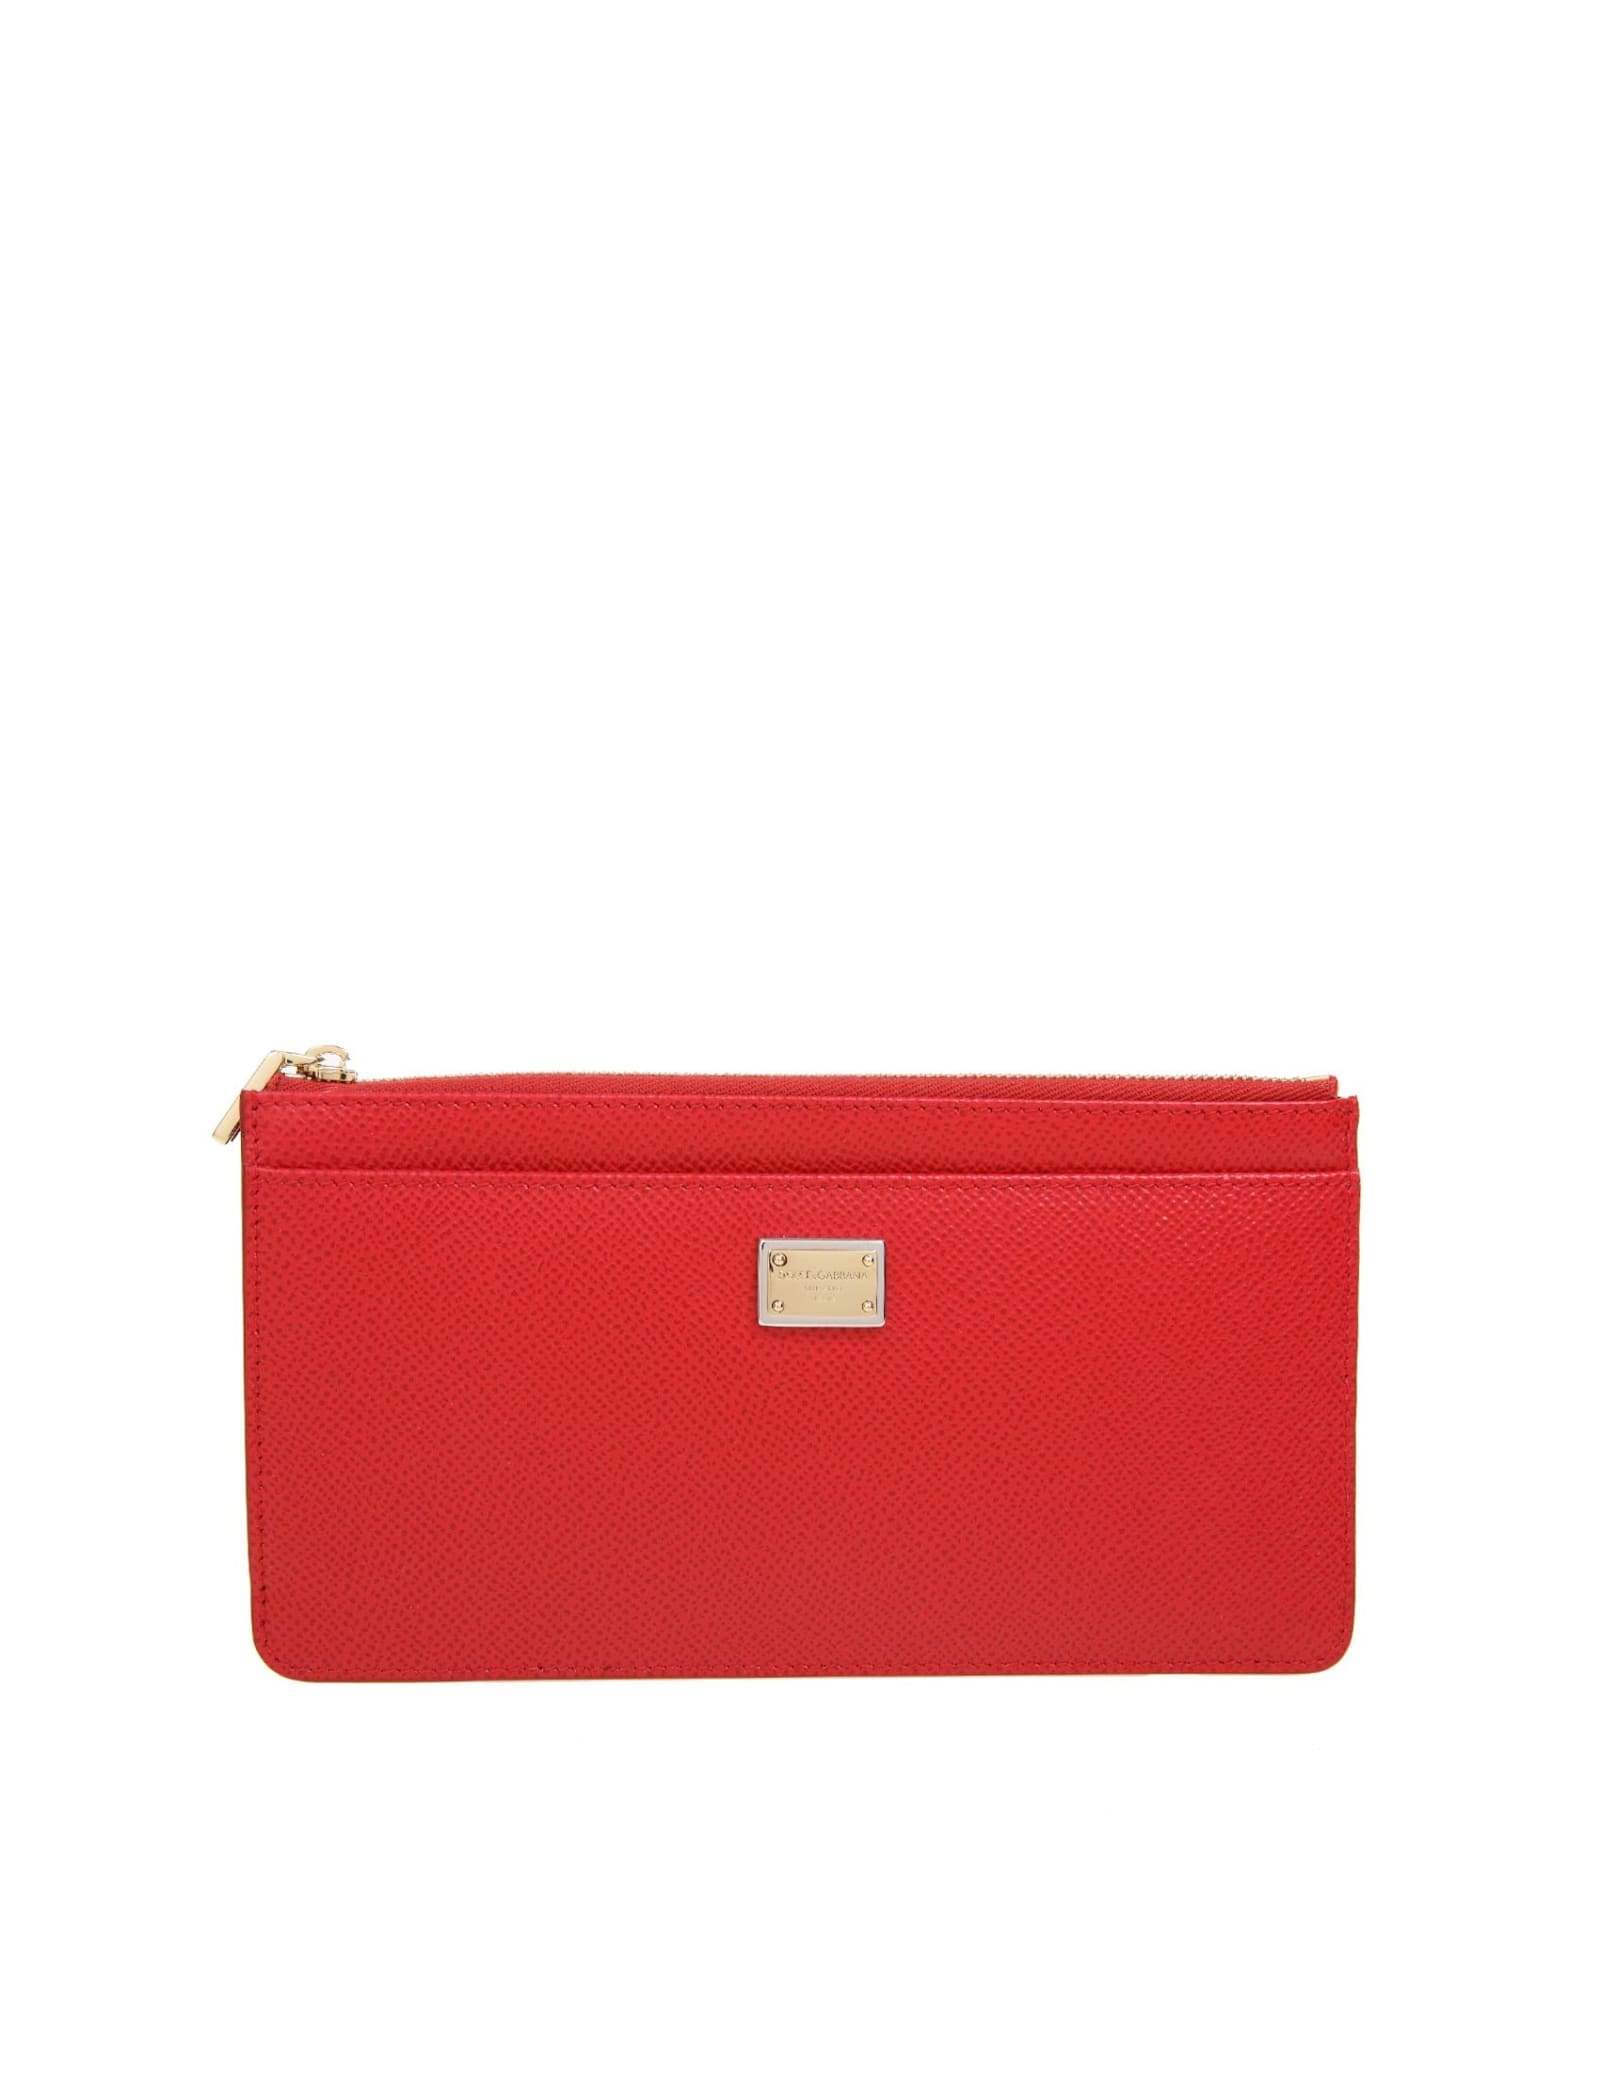 DOLCE & GABBANA CARD HOLDER IN RED LEATHER,11747588